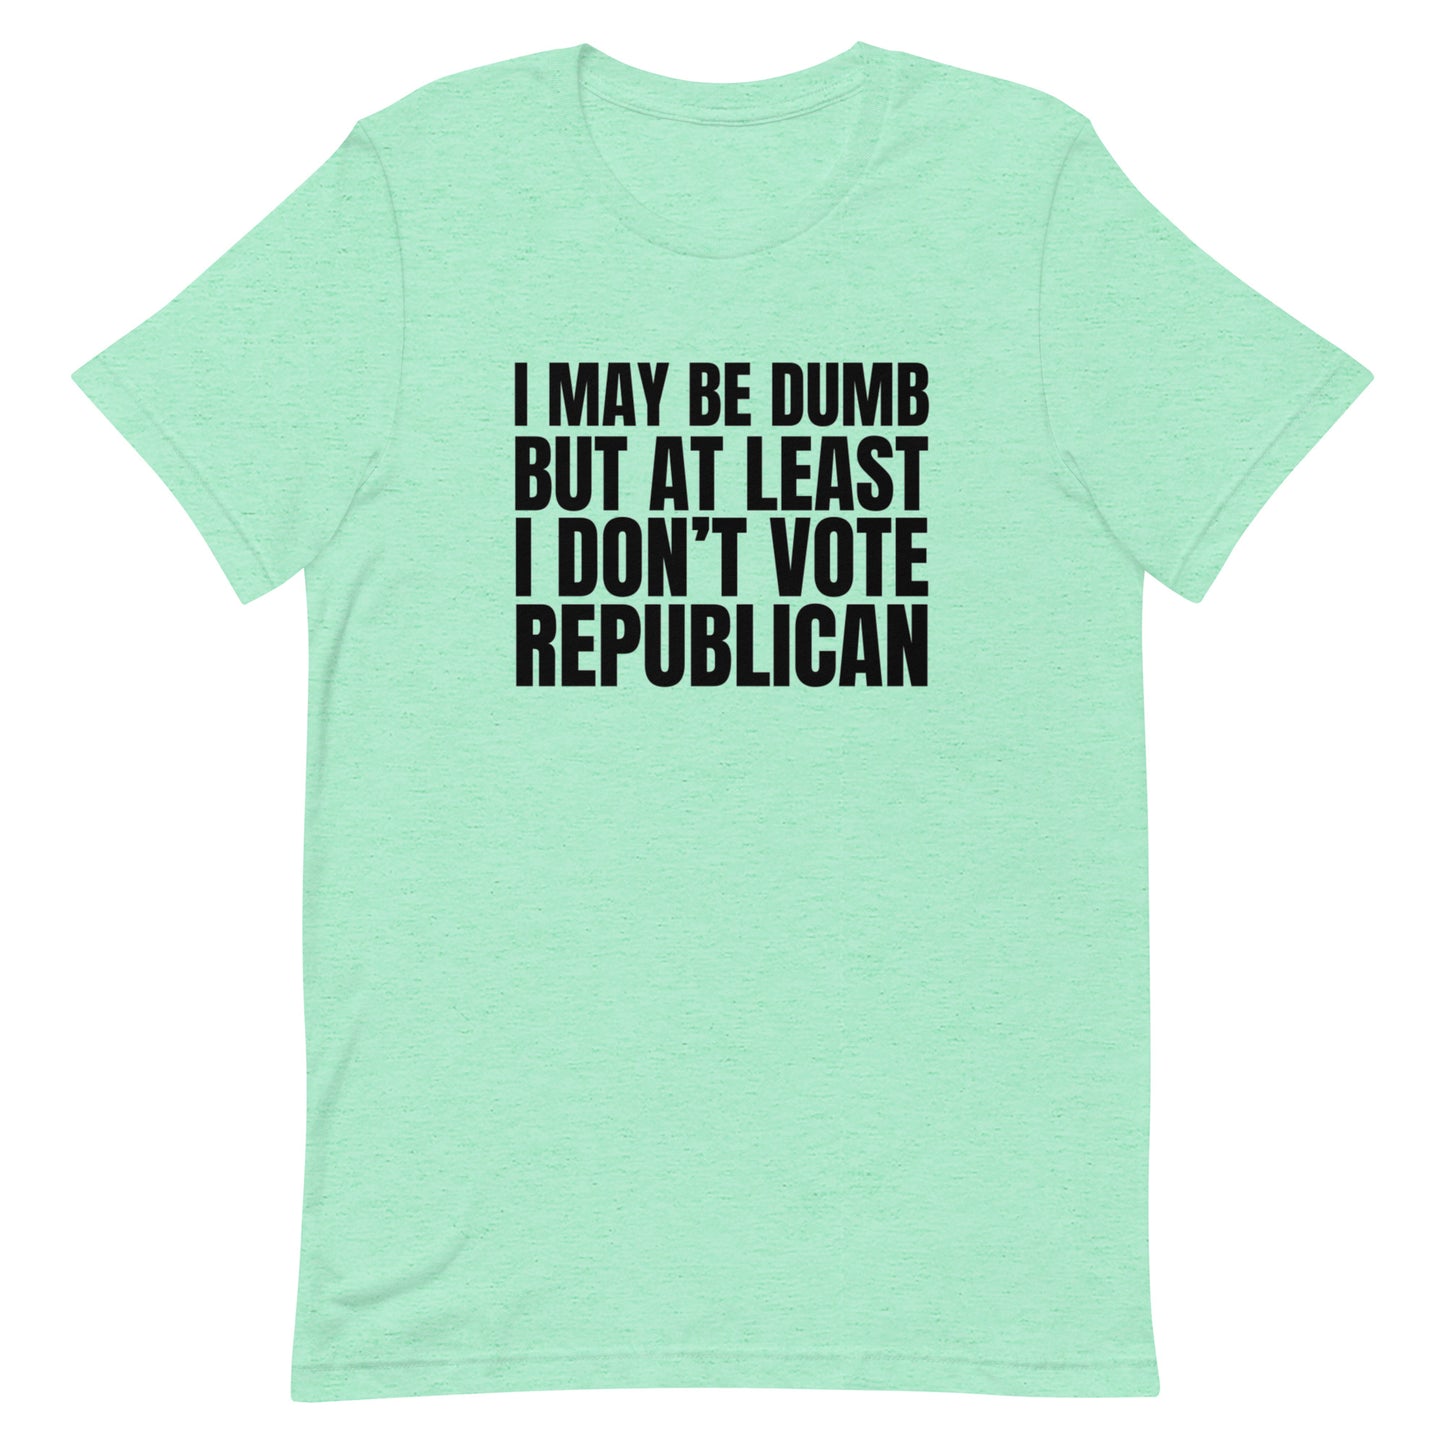 I May Be Dumb But At Least I Don't Vote Republican Unisex t-shirt